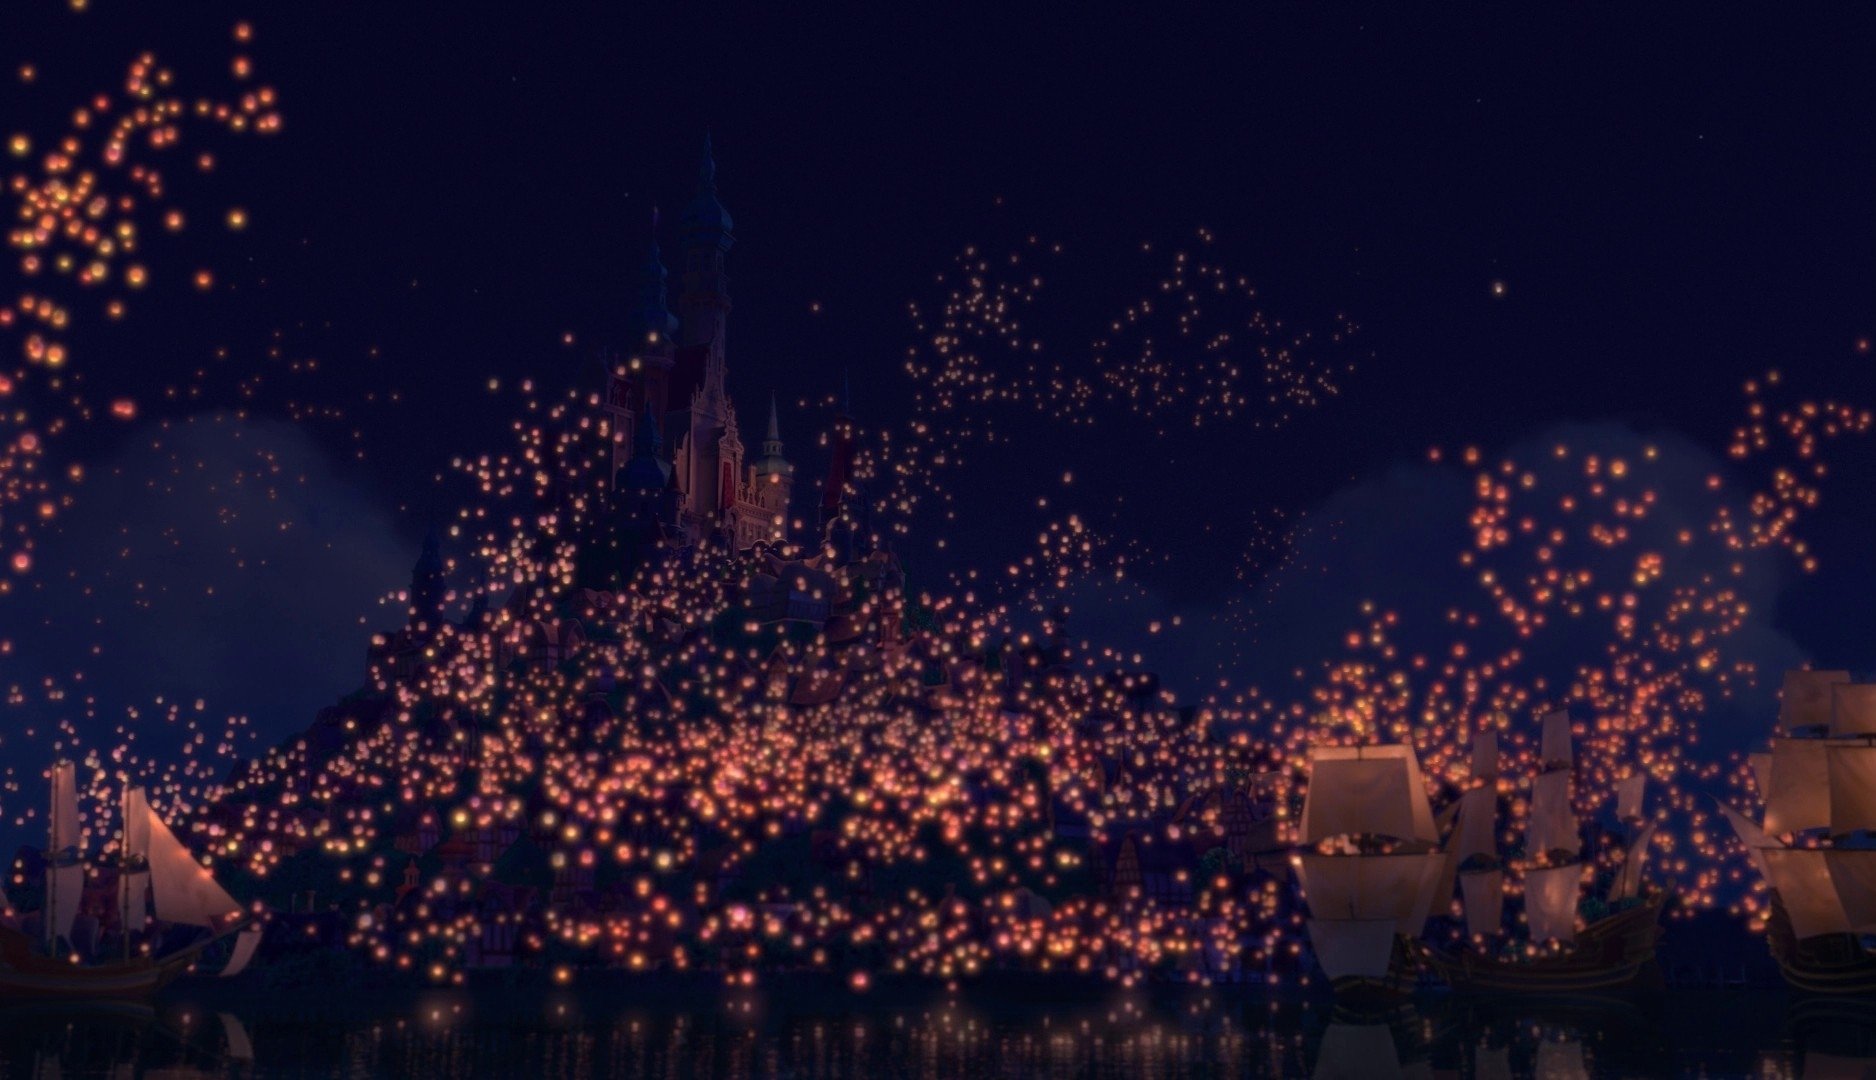 disney, Company, Movies, Night, Lights, Lanterns, Tangled, Rapunzel  Wallpapers HD / Desktop and Mobile Backgrounds